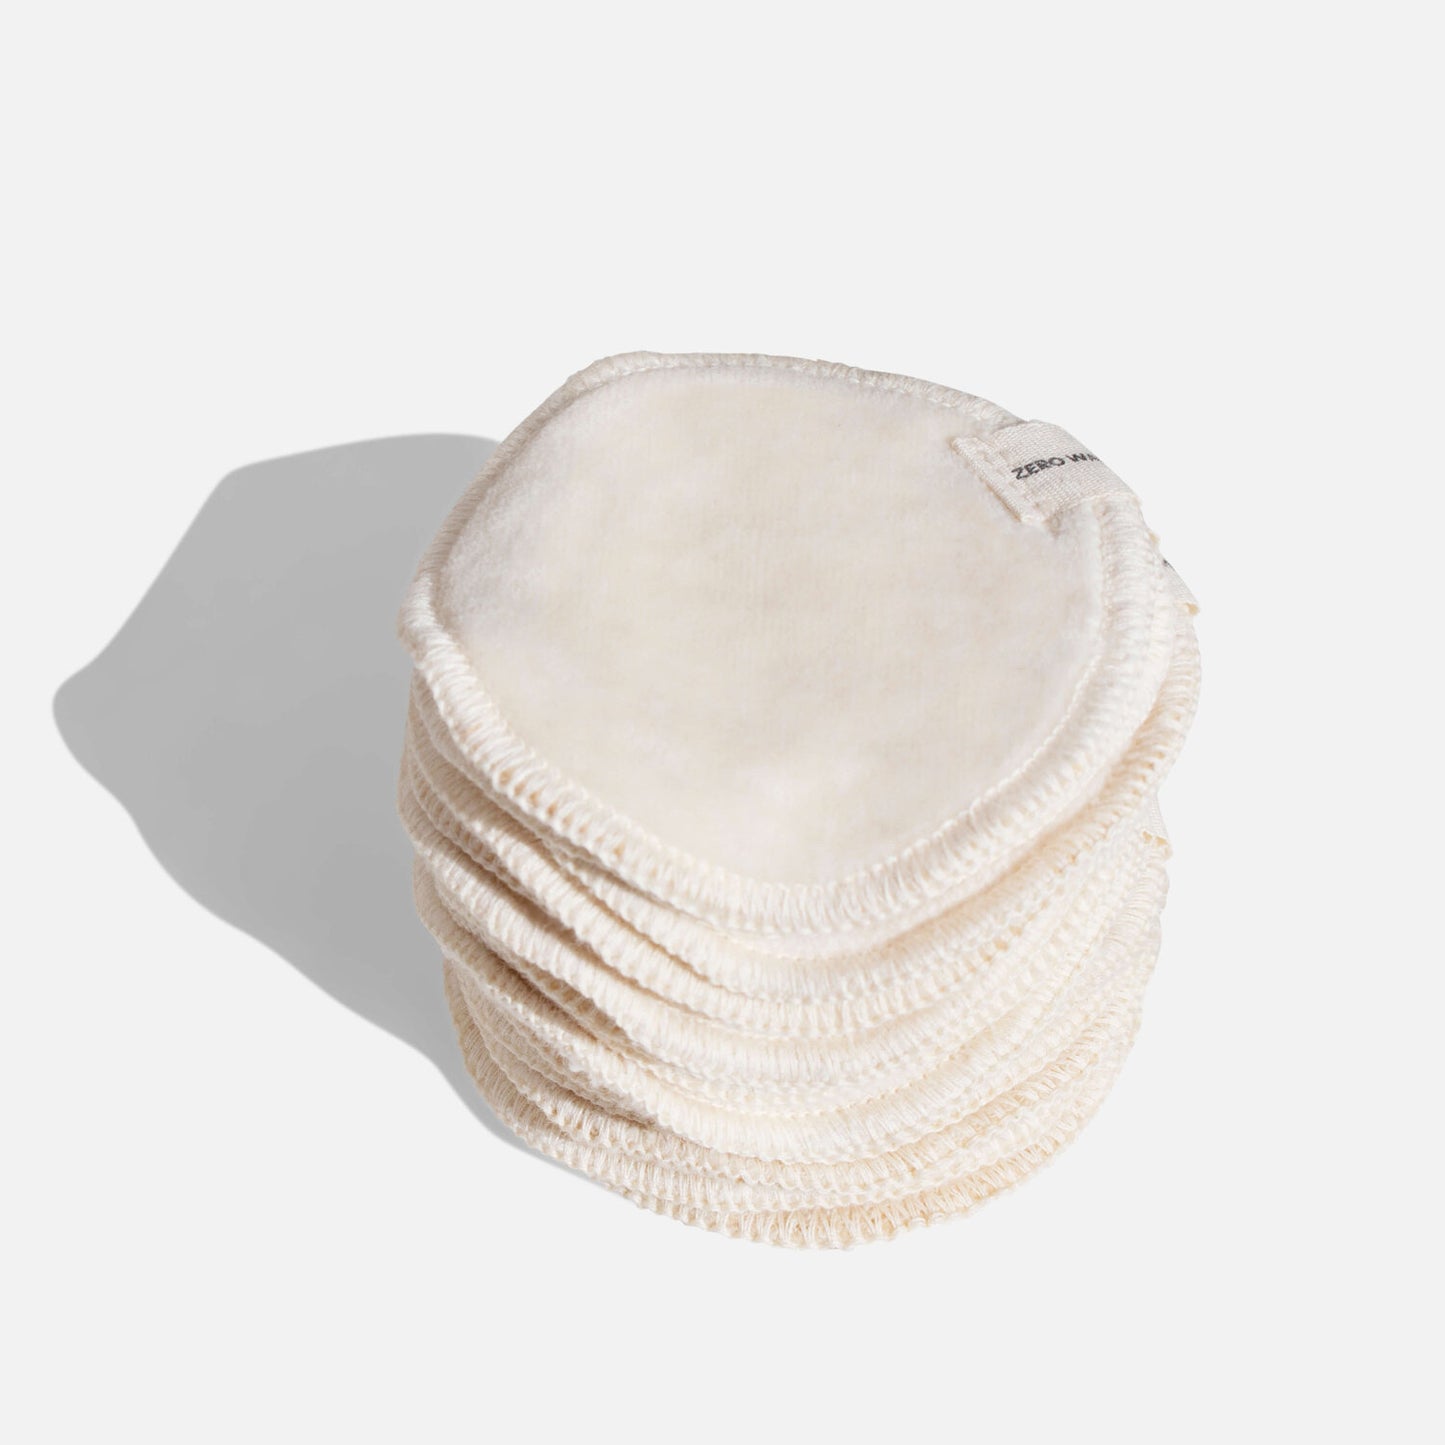 Organic Cotton Make Up Remover Pads & Wash Bag in Cream - 16 Pack